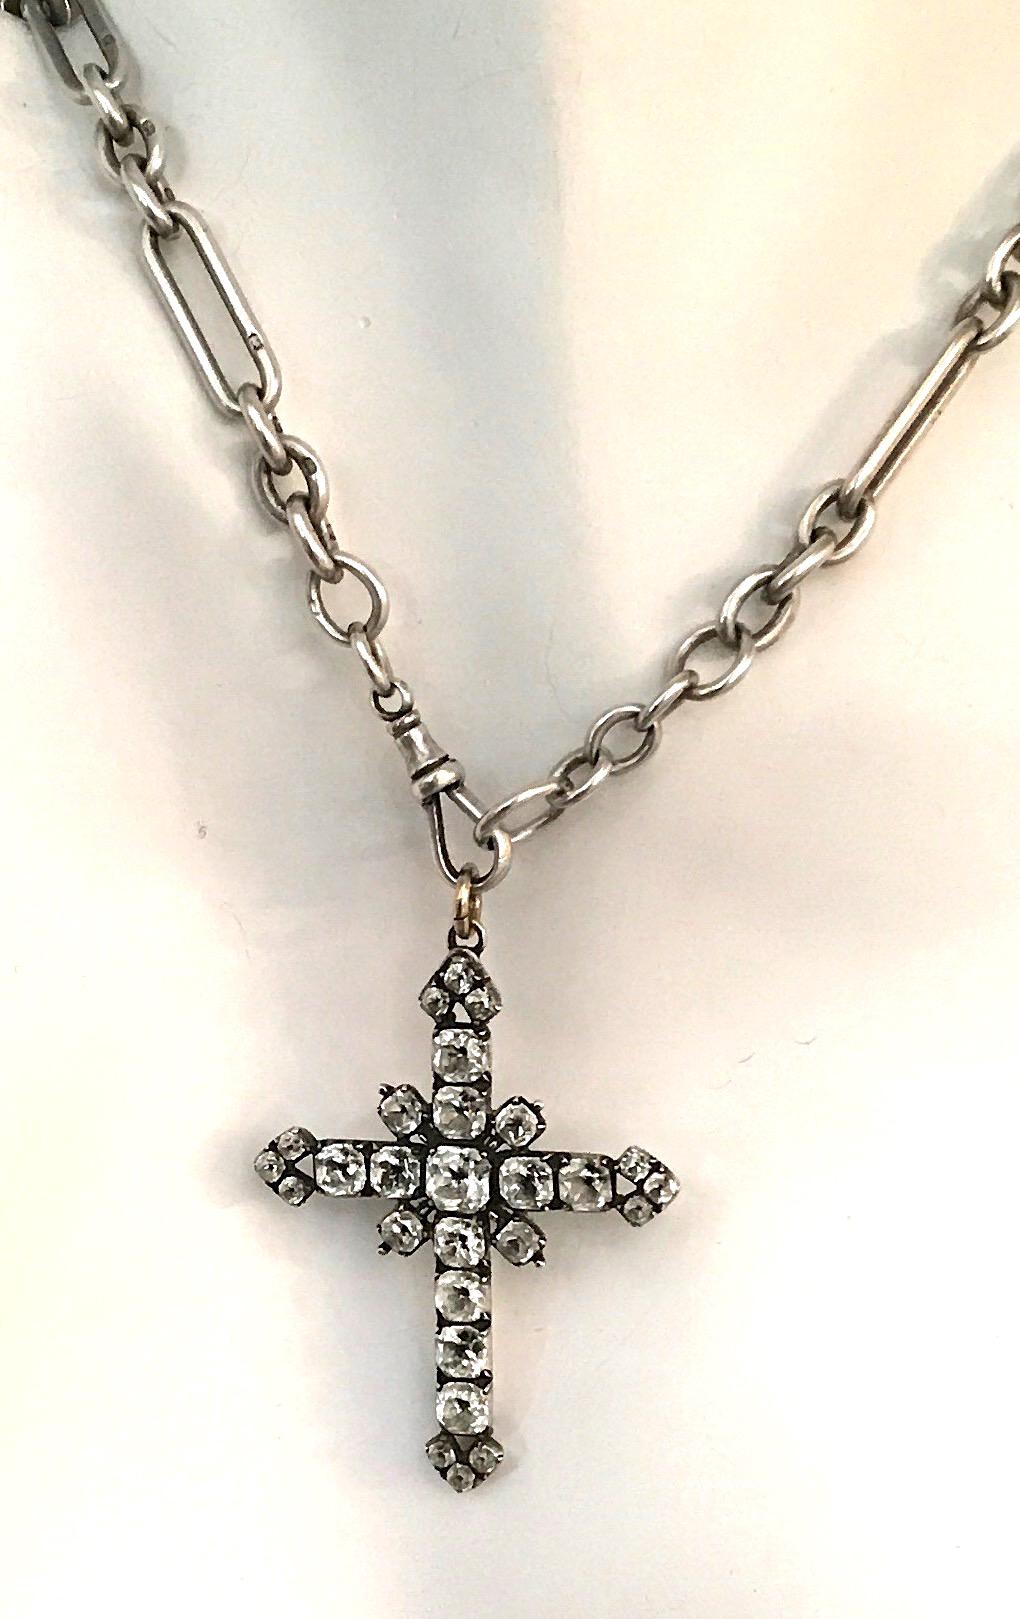 This is the wonderful Latin cross pendant you have been looking for. Crafted by 18th century jewelry artisans, our cross is made from 18th century paste and backed by sterling silver. A unique feature of Georgian jewelry is that as much care was